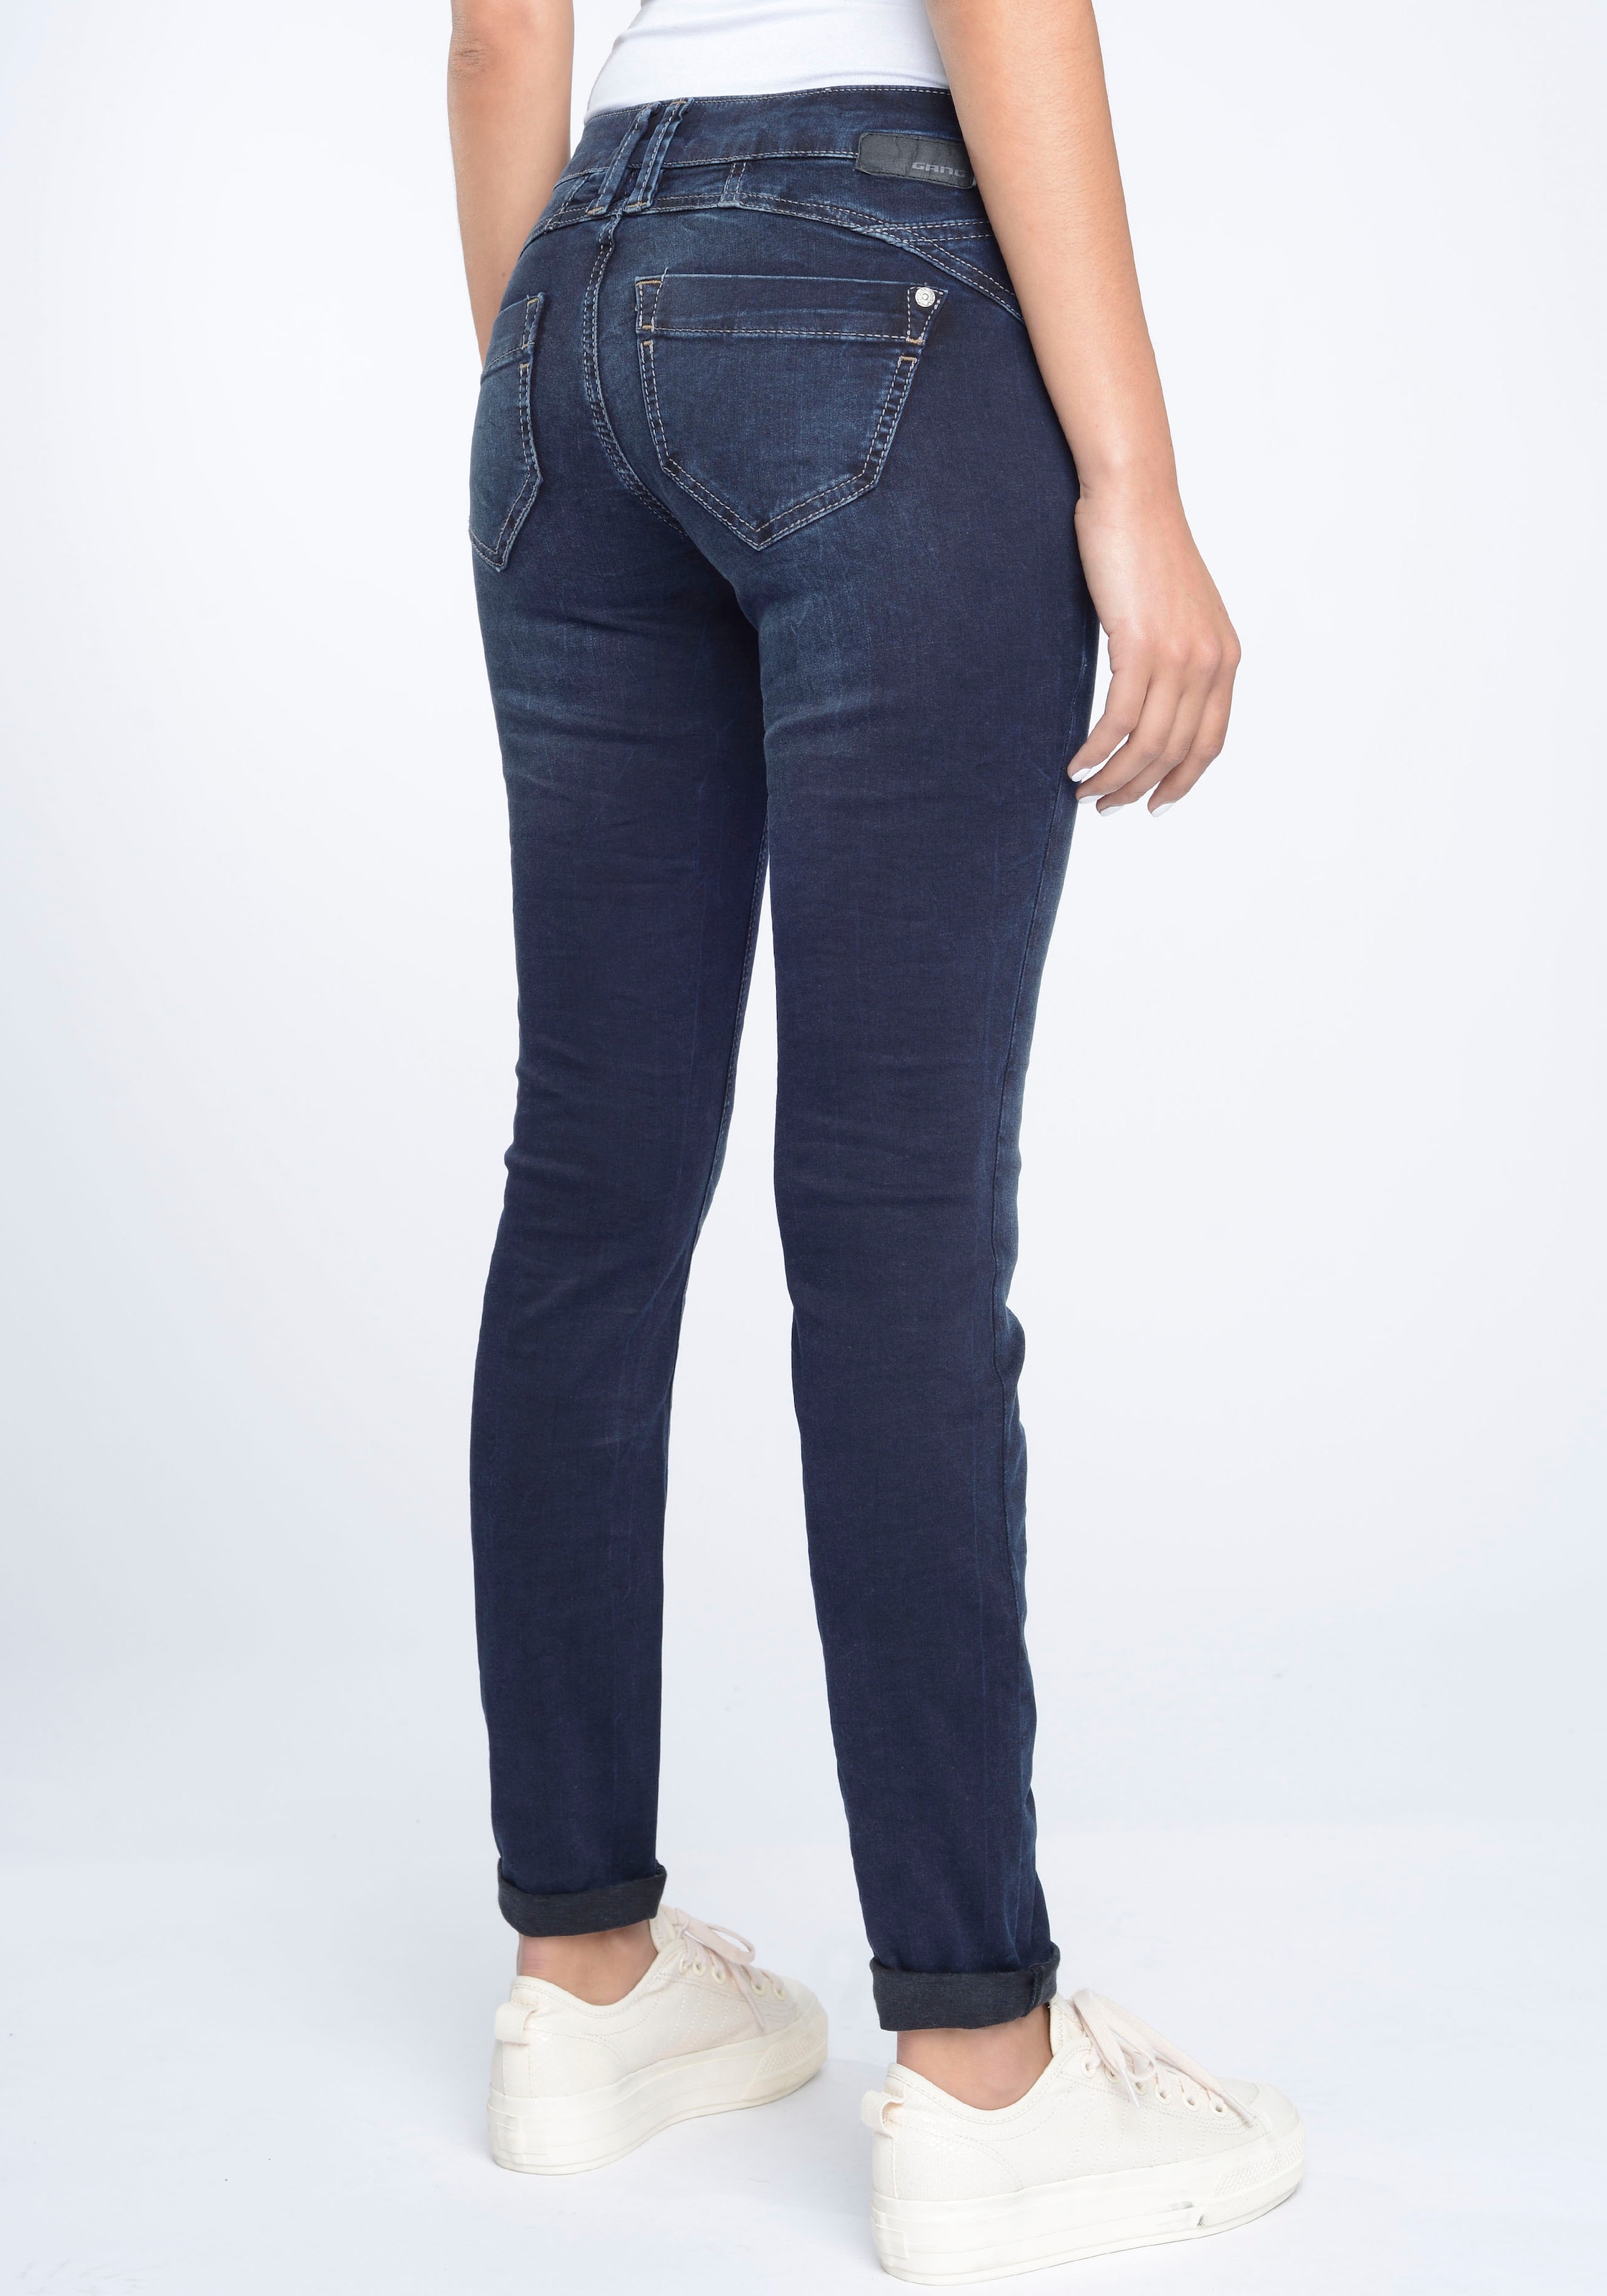 GANG Skinny-fit-Jeans »94Nena«, in authenischer Used-Waschung bei ♕ | Stretchjeans